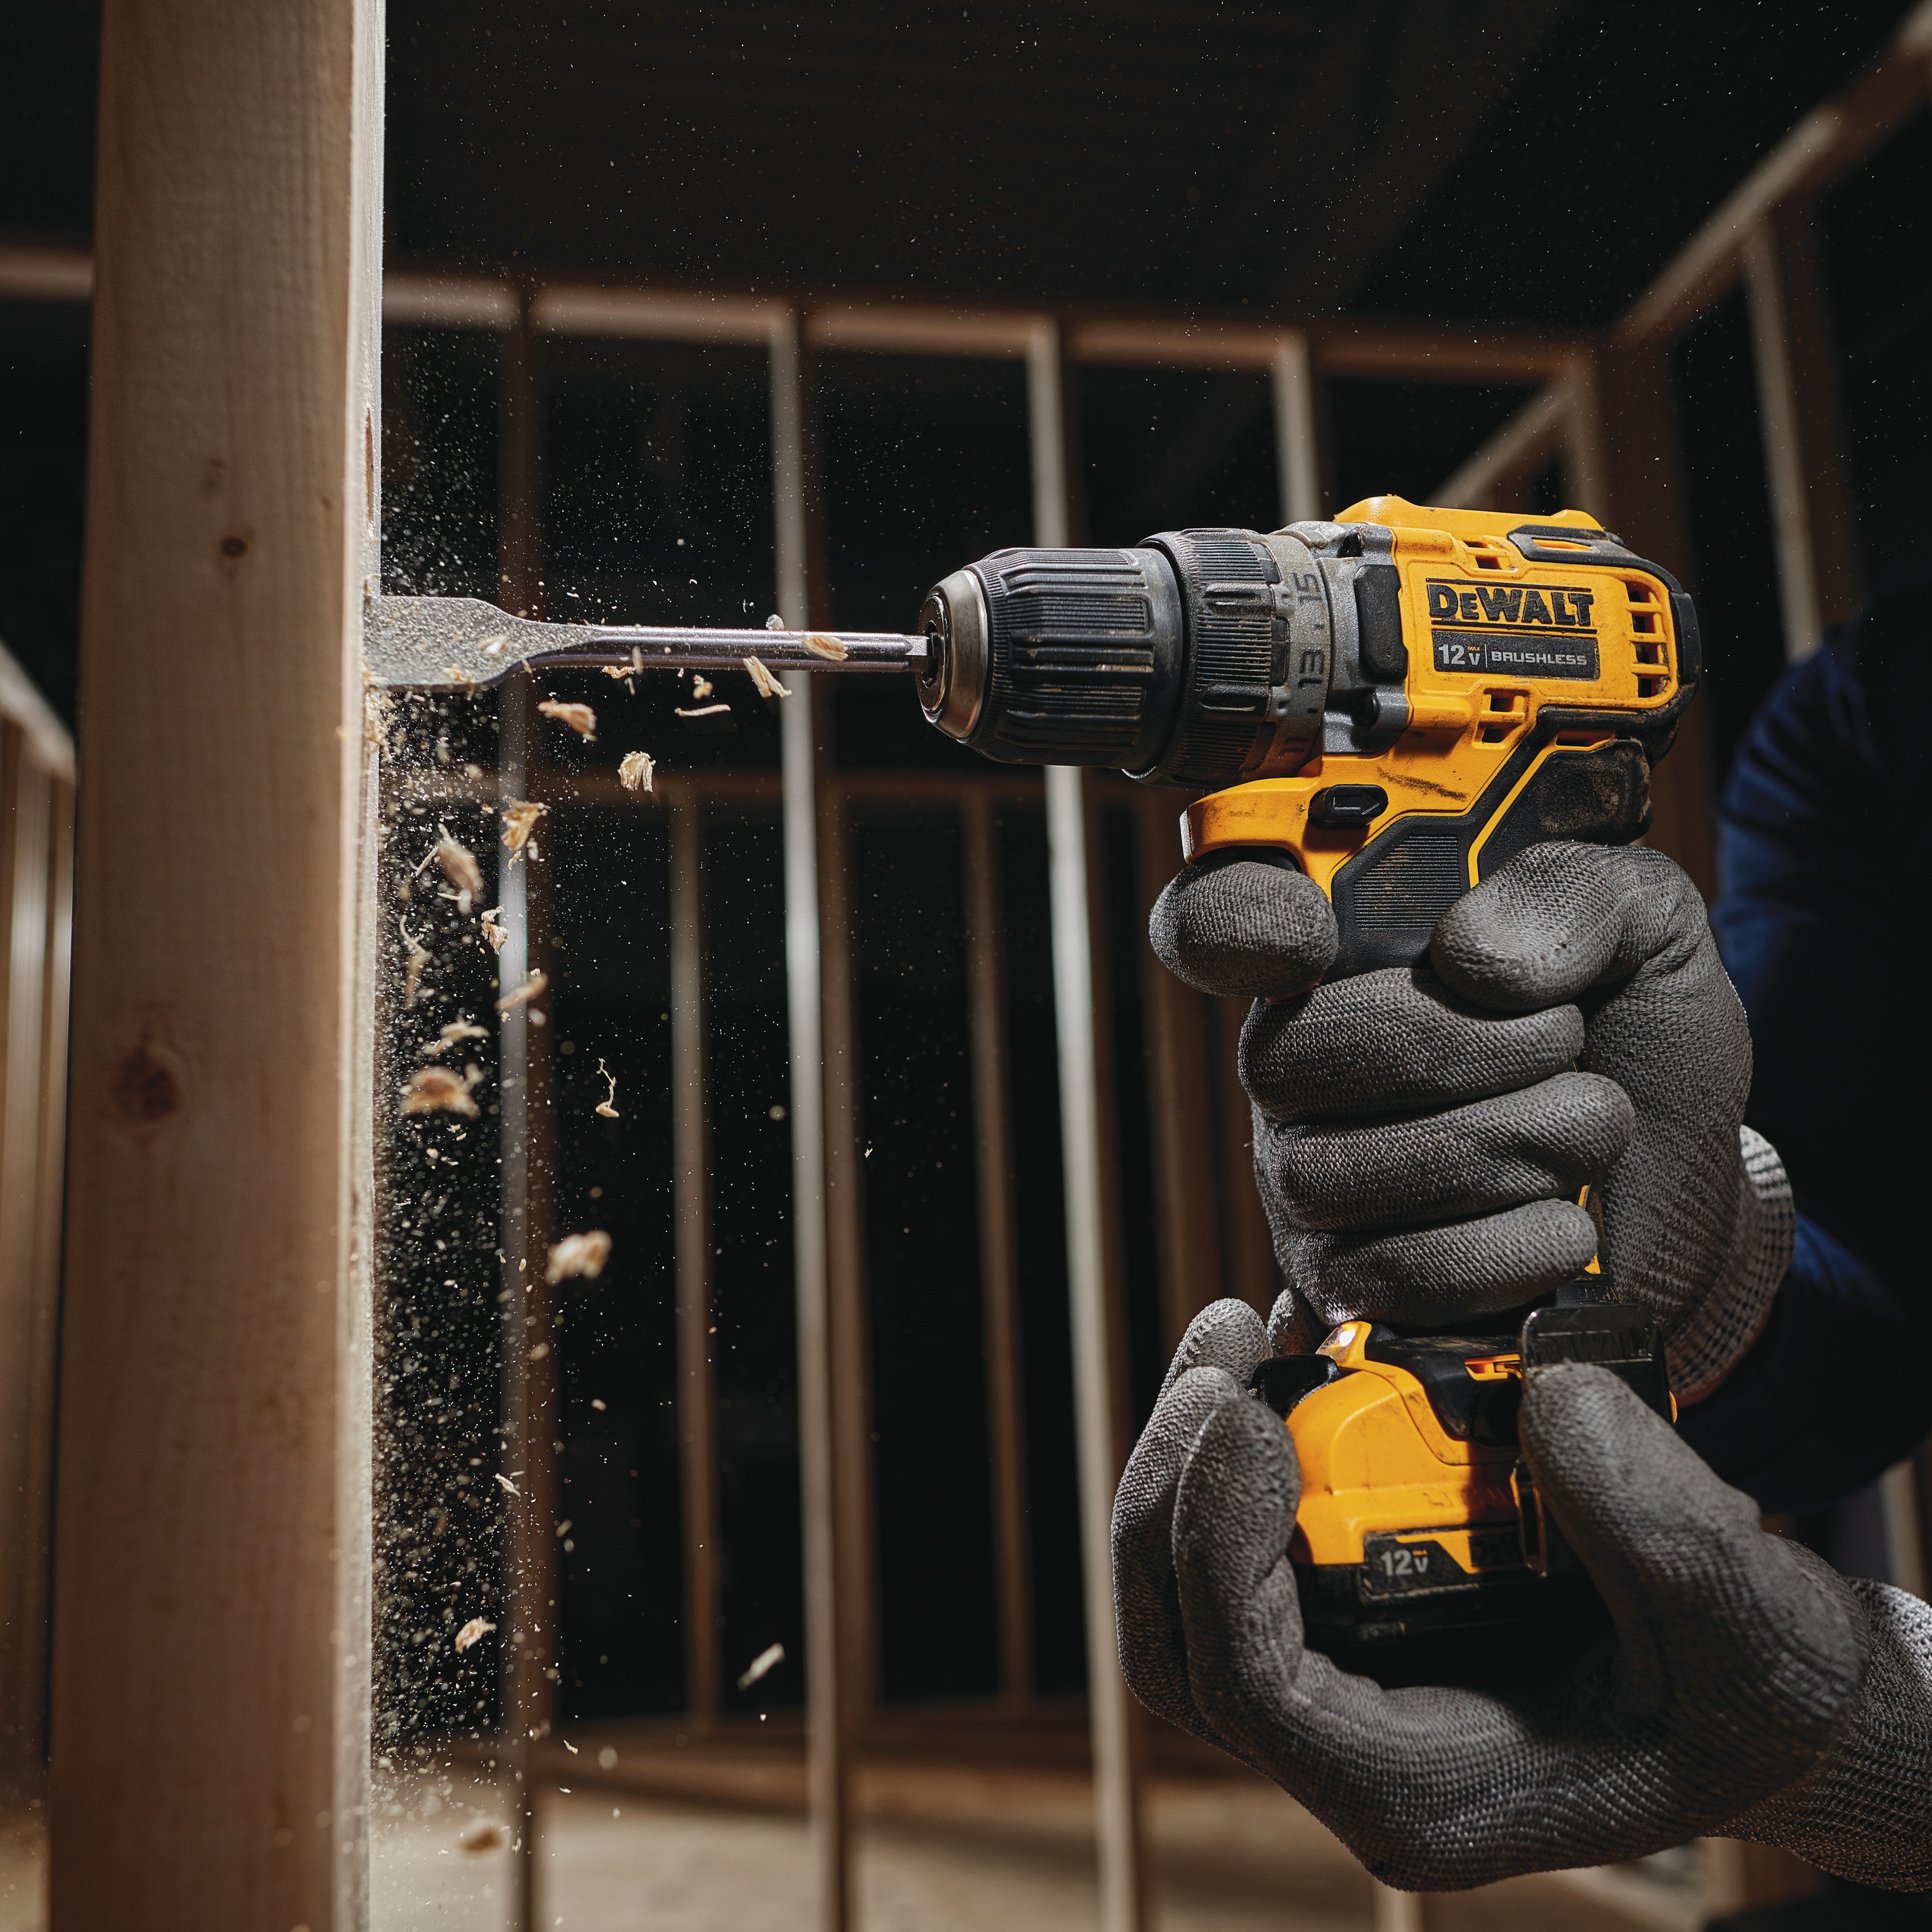 XTREME Brushless cordless drill drilling  wooden frame.